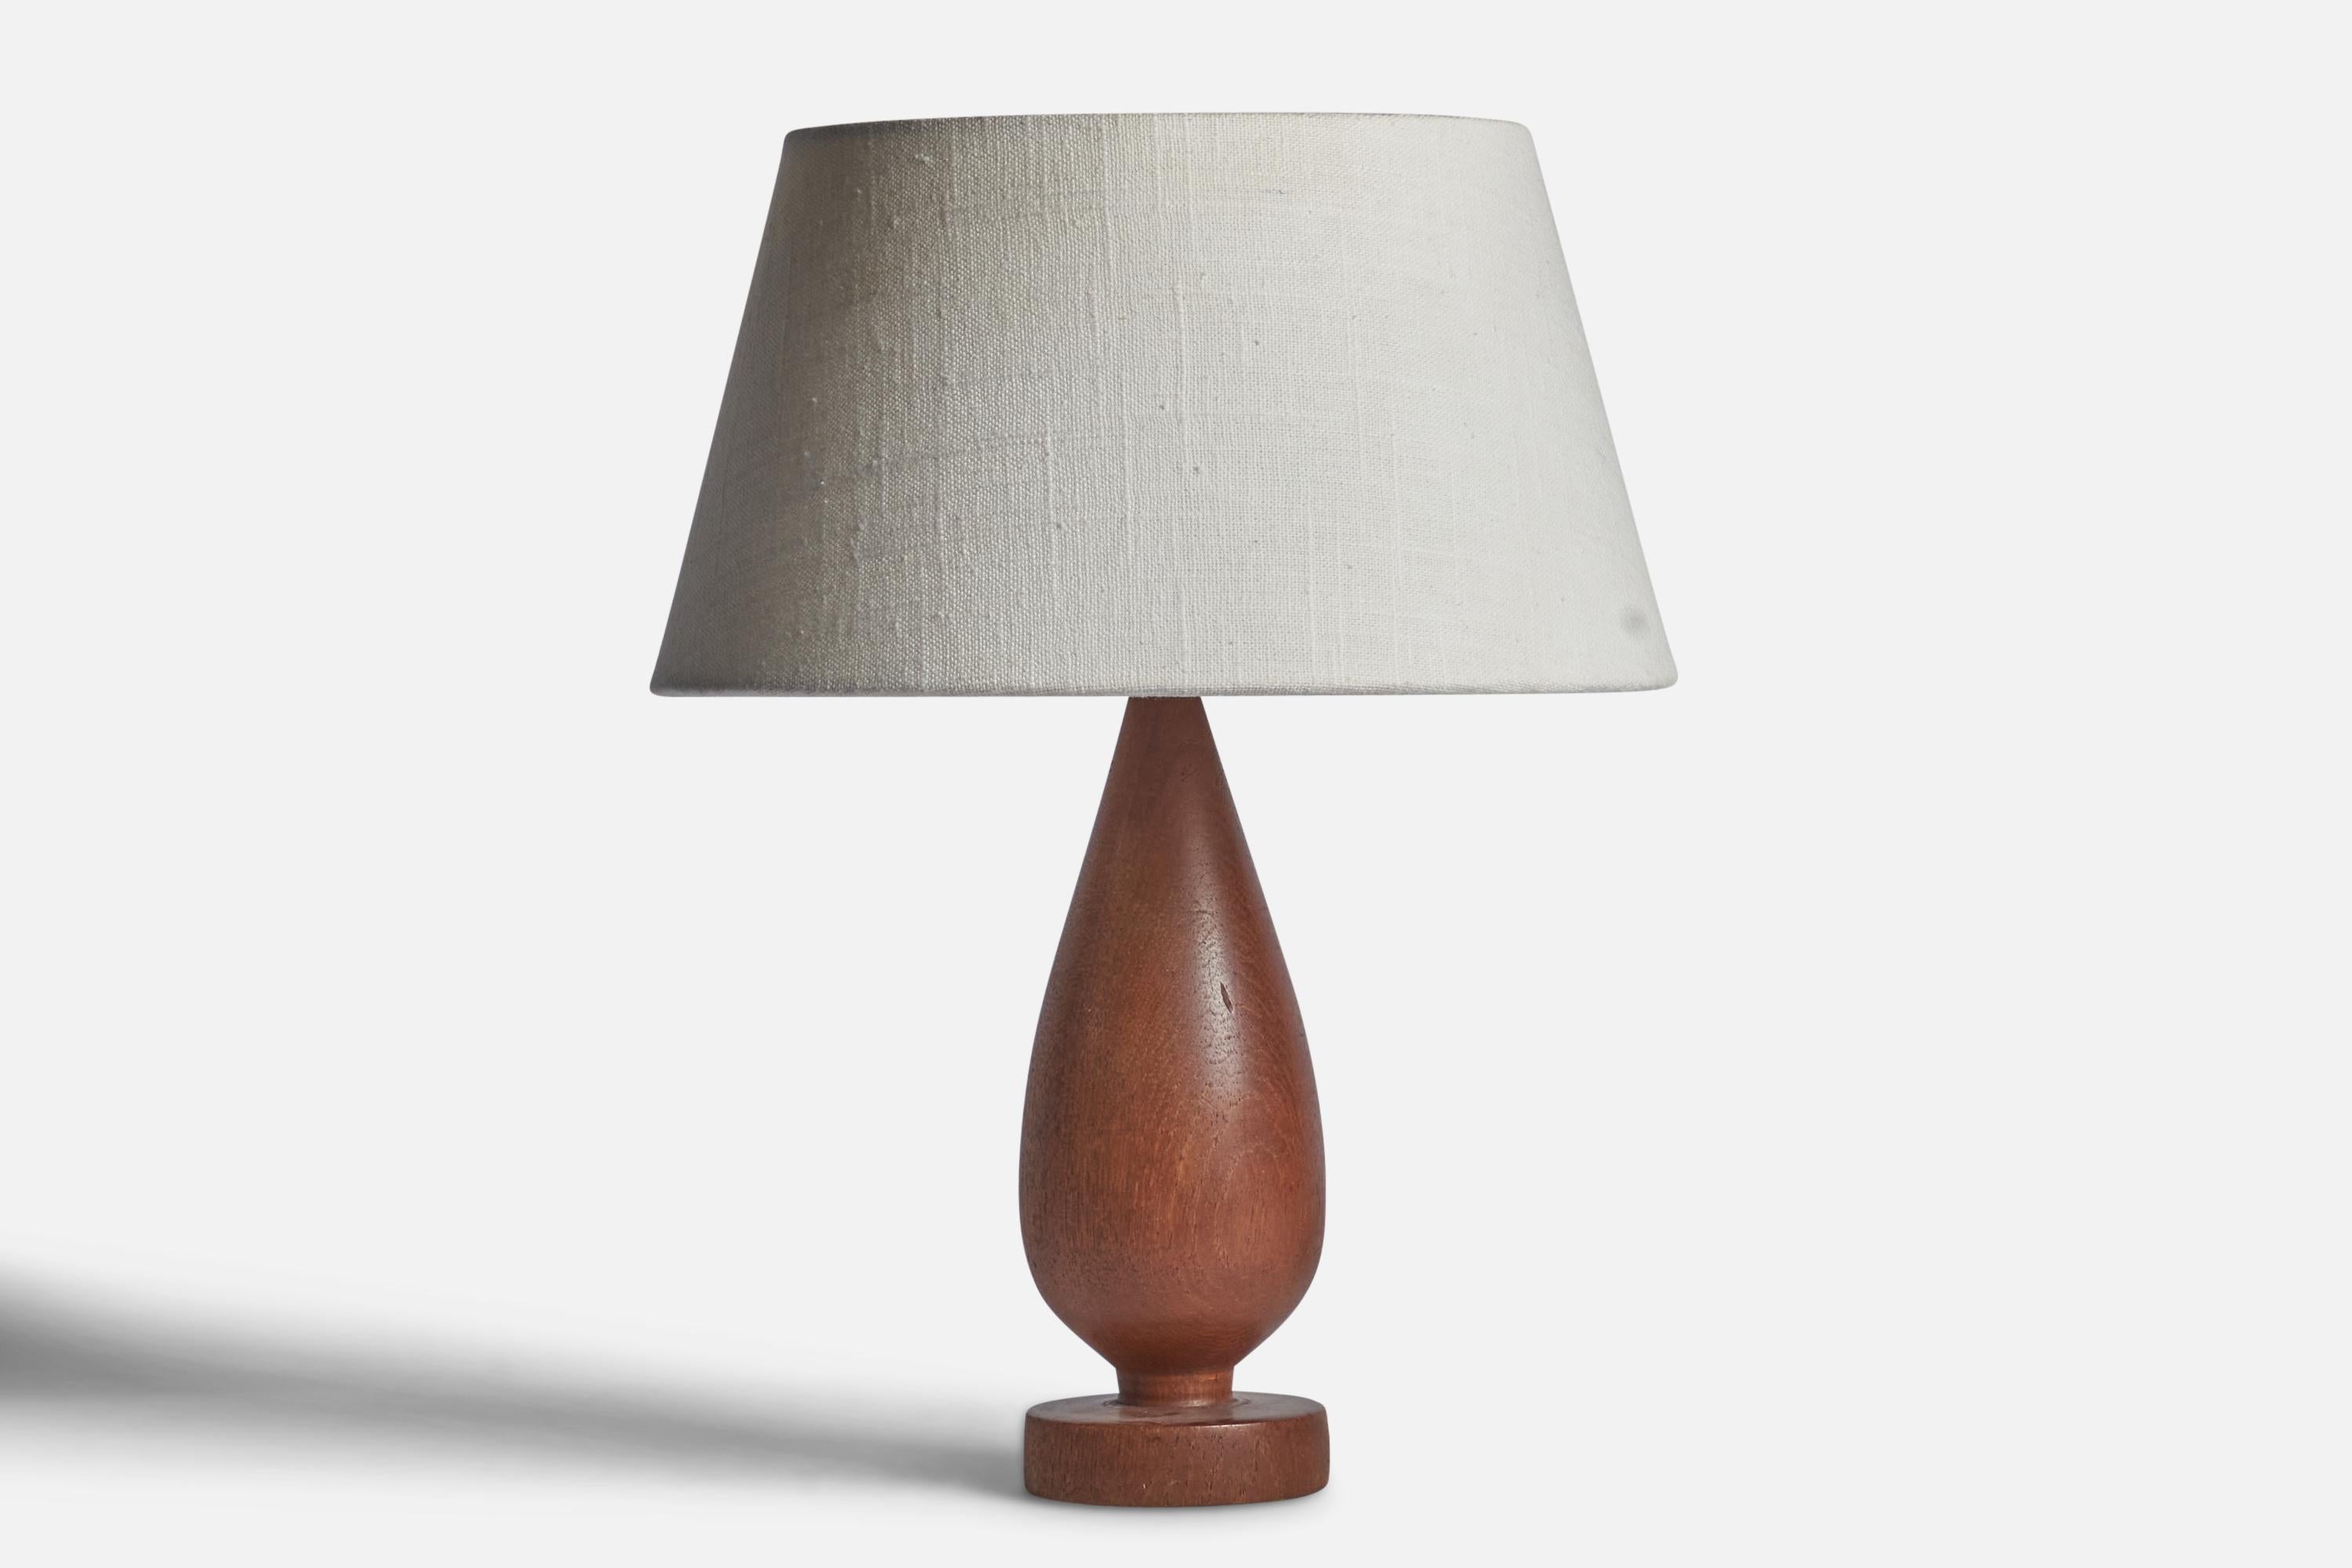 A turned teak table lamp designed and produced in Sweden, c. 1950s.

Dimensions of Lamp (inches): 10.25” H x 3” Diameter
Dimensions of Shade (inches): 7” Top Diameter x 10” Bottom Diameter x 5.5” H 
Dimensions of Lamp with Shade (inches): 13.25” H x